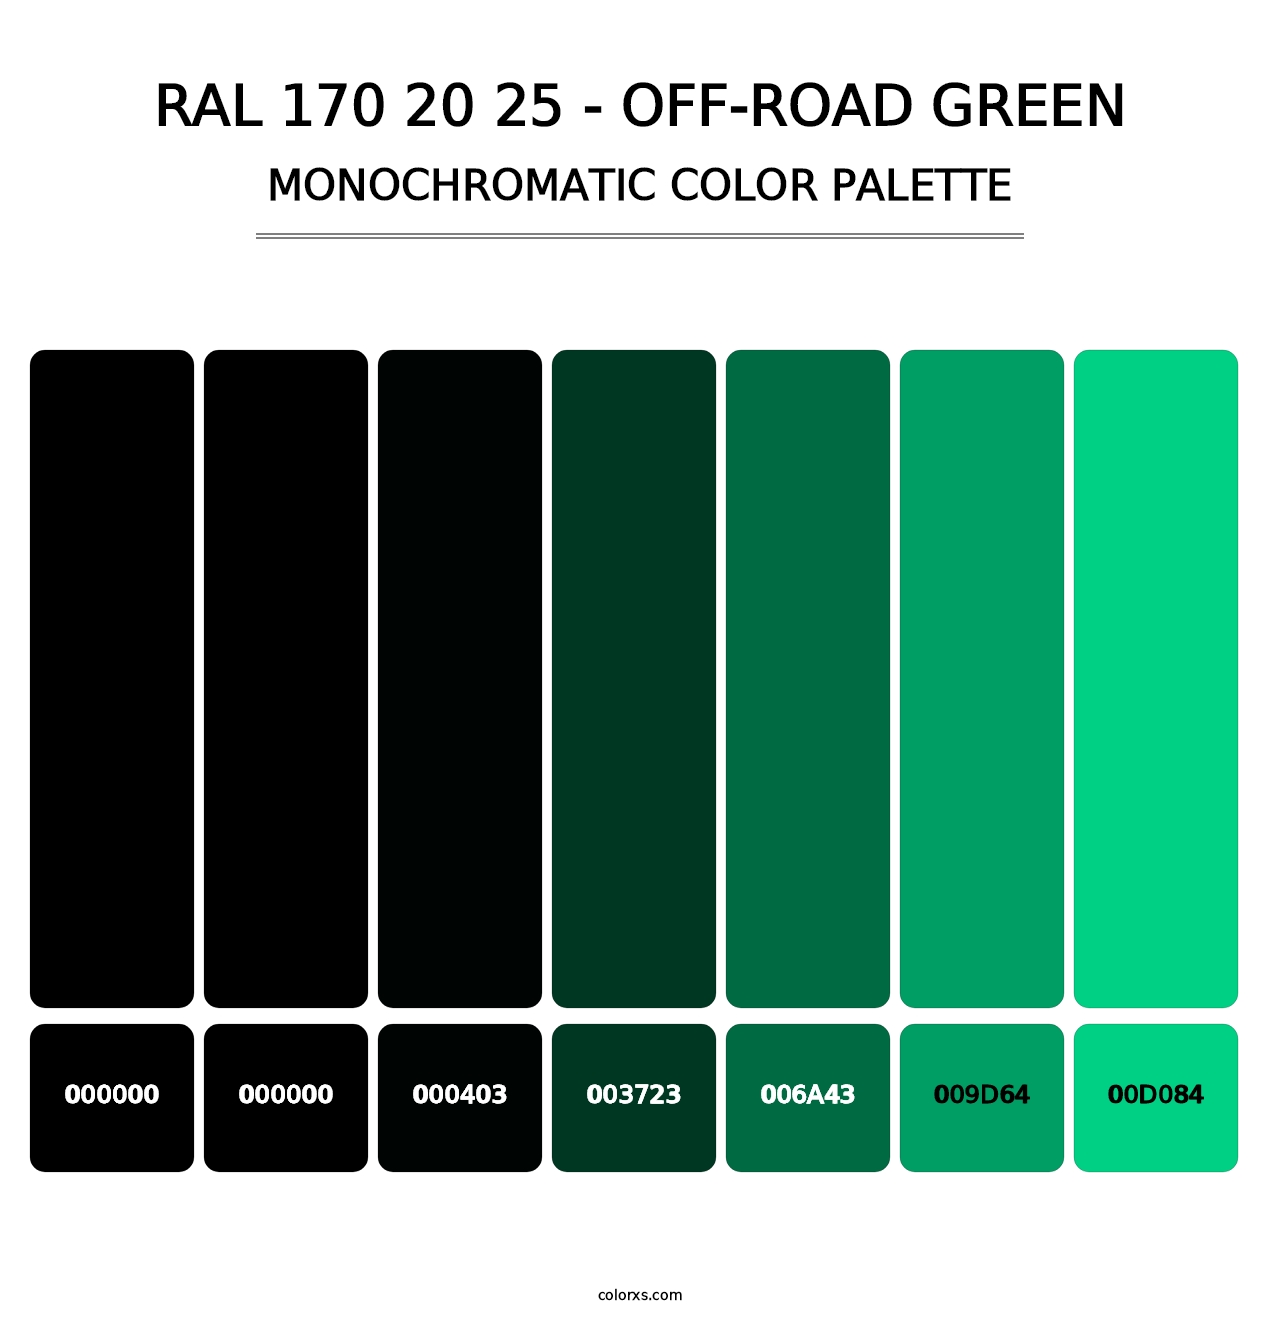 RAL 170 20 25 - Off-Road Green - Monochromatic Color Palette